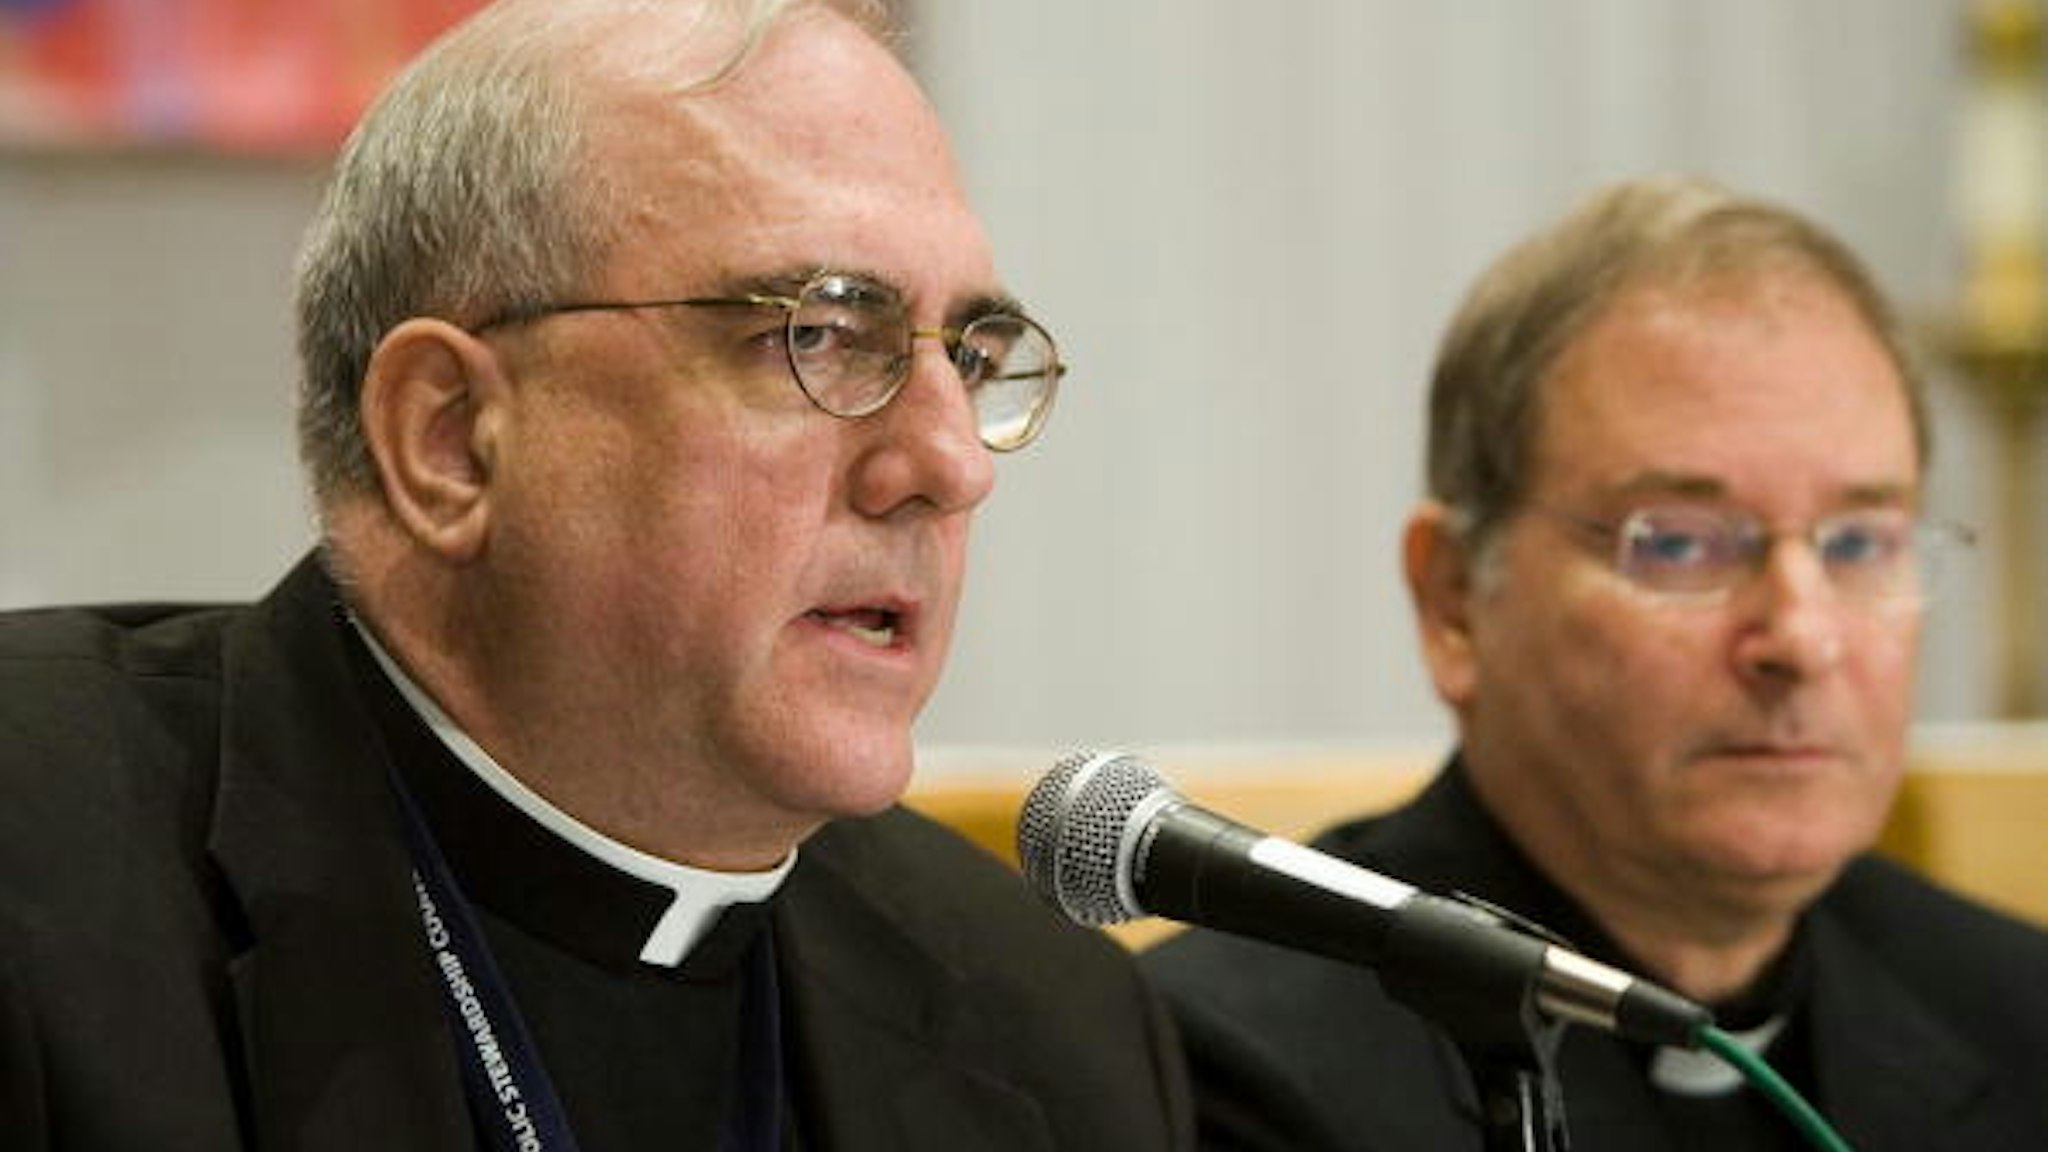 Baltimore, UNITED STATES: Archbishop of Kansas City, Kansas Josep Naumann (L) speaks at a press conference during a break from the fall meetings of the United States Conference of Catholic Bishops (USCCB) 13 November, 2006 in Baltimore, Maryland. The group of bishops from around the United States will discuss and vote on issues of interest to the Catholic Church. AFP PHOTO/Brendan SMIALOWSKI